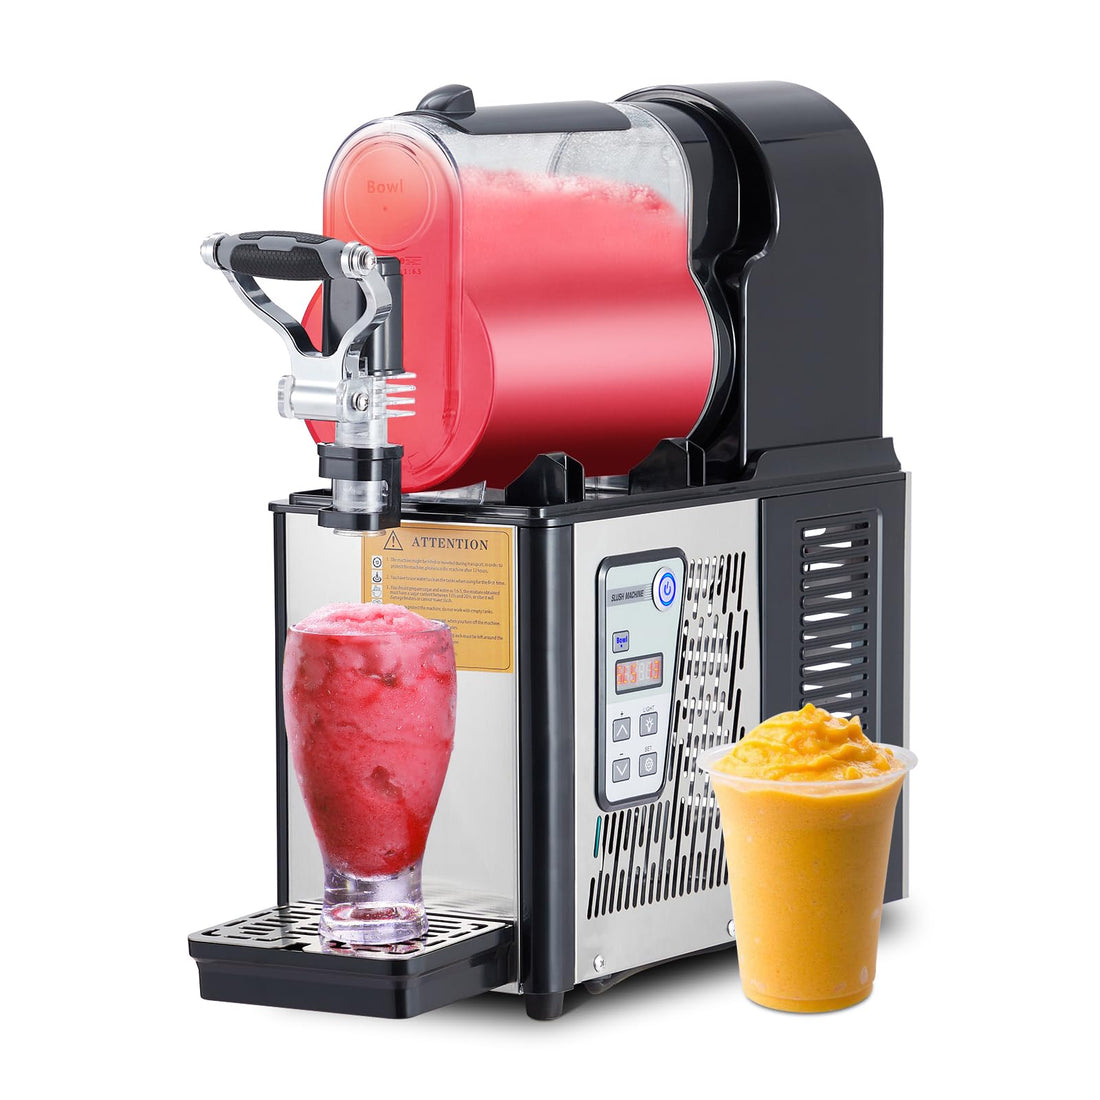 GARVEE Commercial Slushie Machine 3L Stainless Steel Self-Cleaning Slushy Maker for Frozen Drinks,Snow Melting Ideal for Home,Coffee Shop,Restaurant